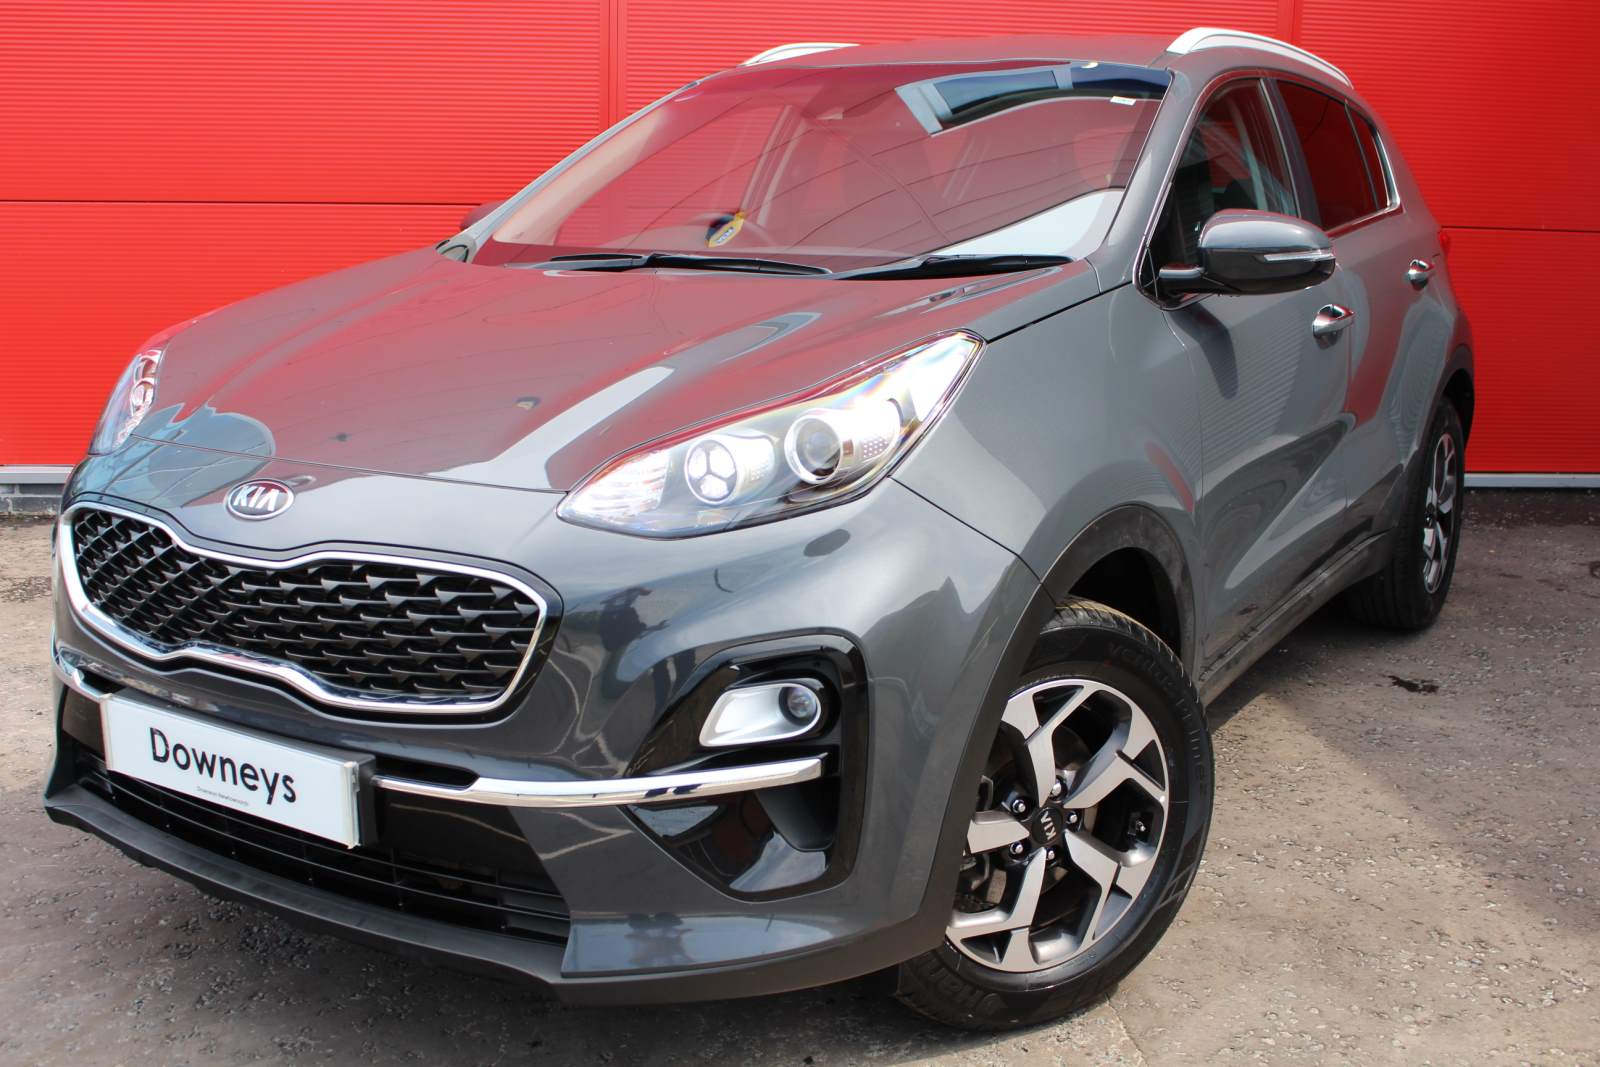 Kia SPORTAGE 2 1.6 CRDI ISG MHEV..FULL TOP UP 7 YEAR WARRANTY FROM DAY OF DELIVERY. 2 YEARS RAC COVER AND 500 DEPOSIT CONTRIBUTION WITH 6.9 APR PCP AVAILABLE